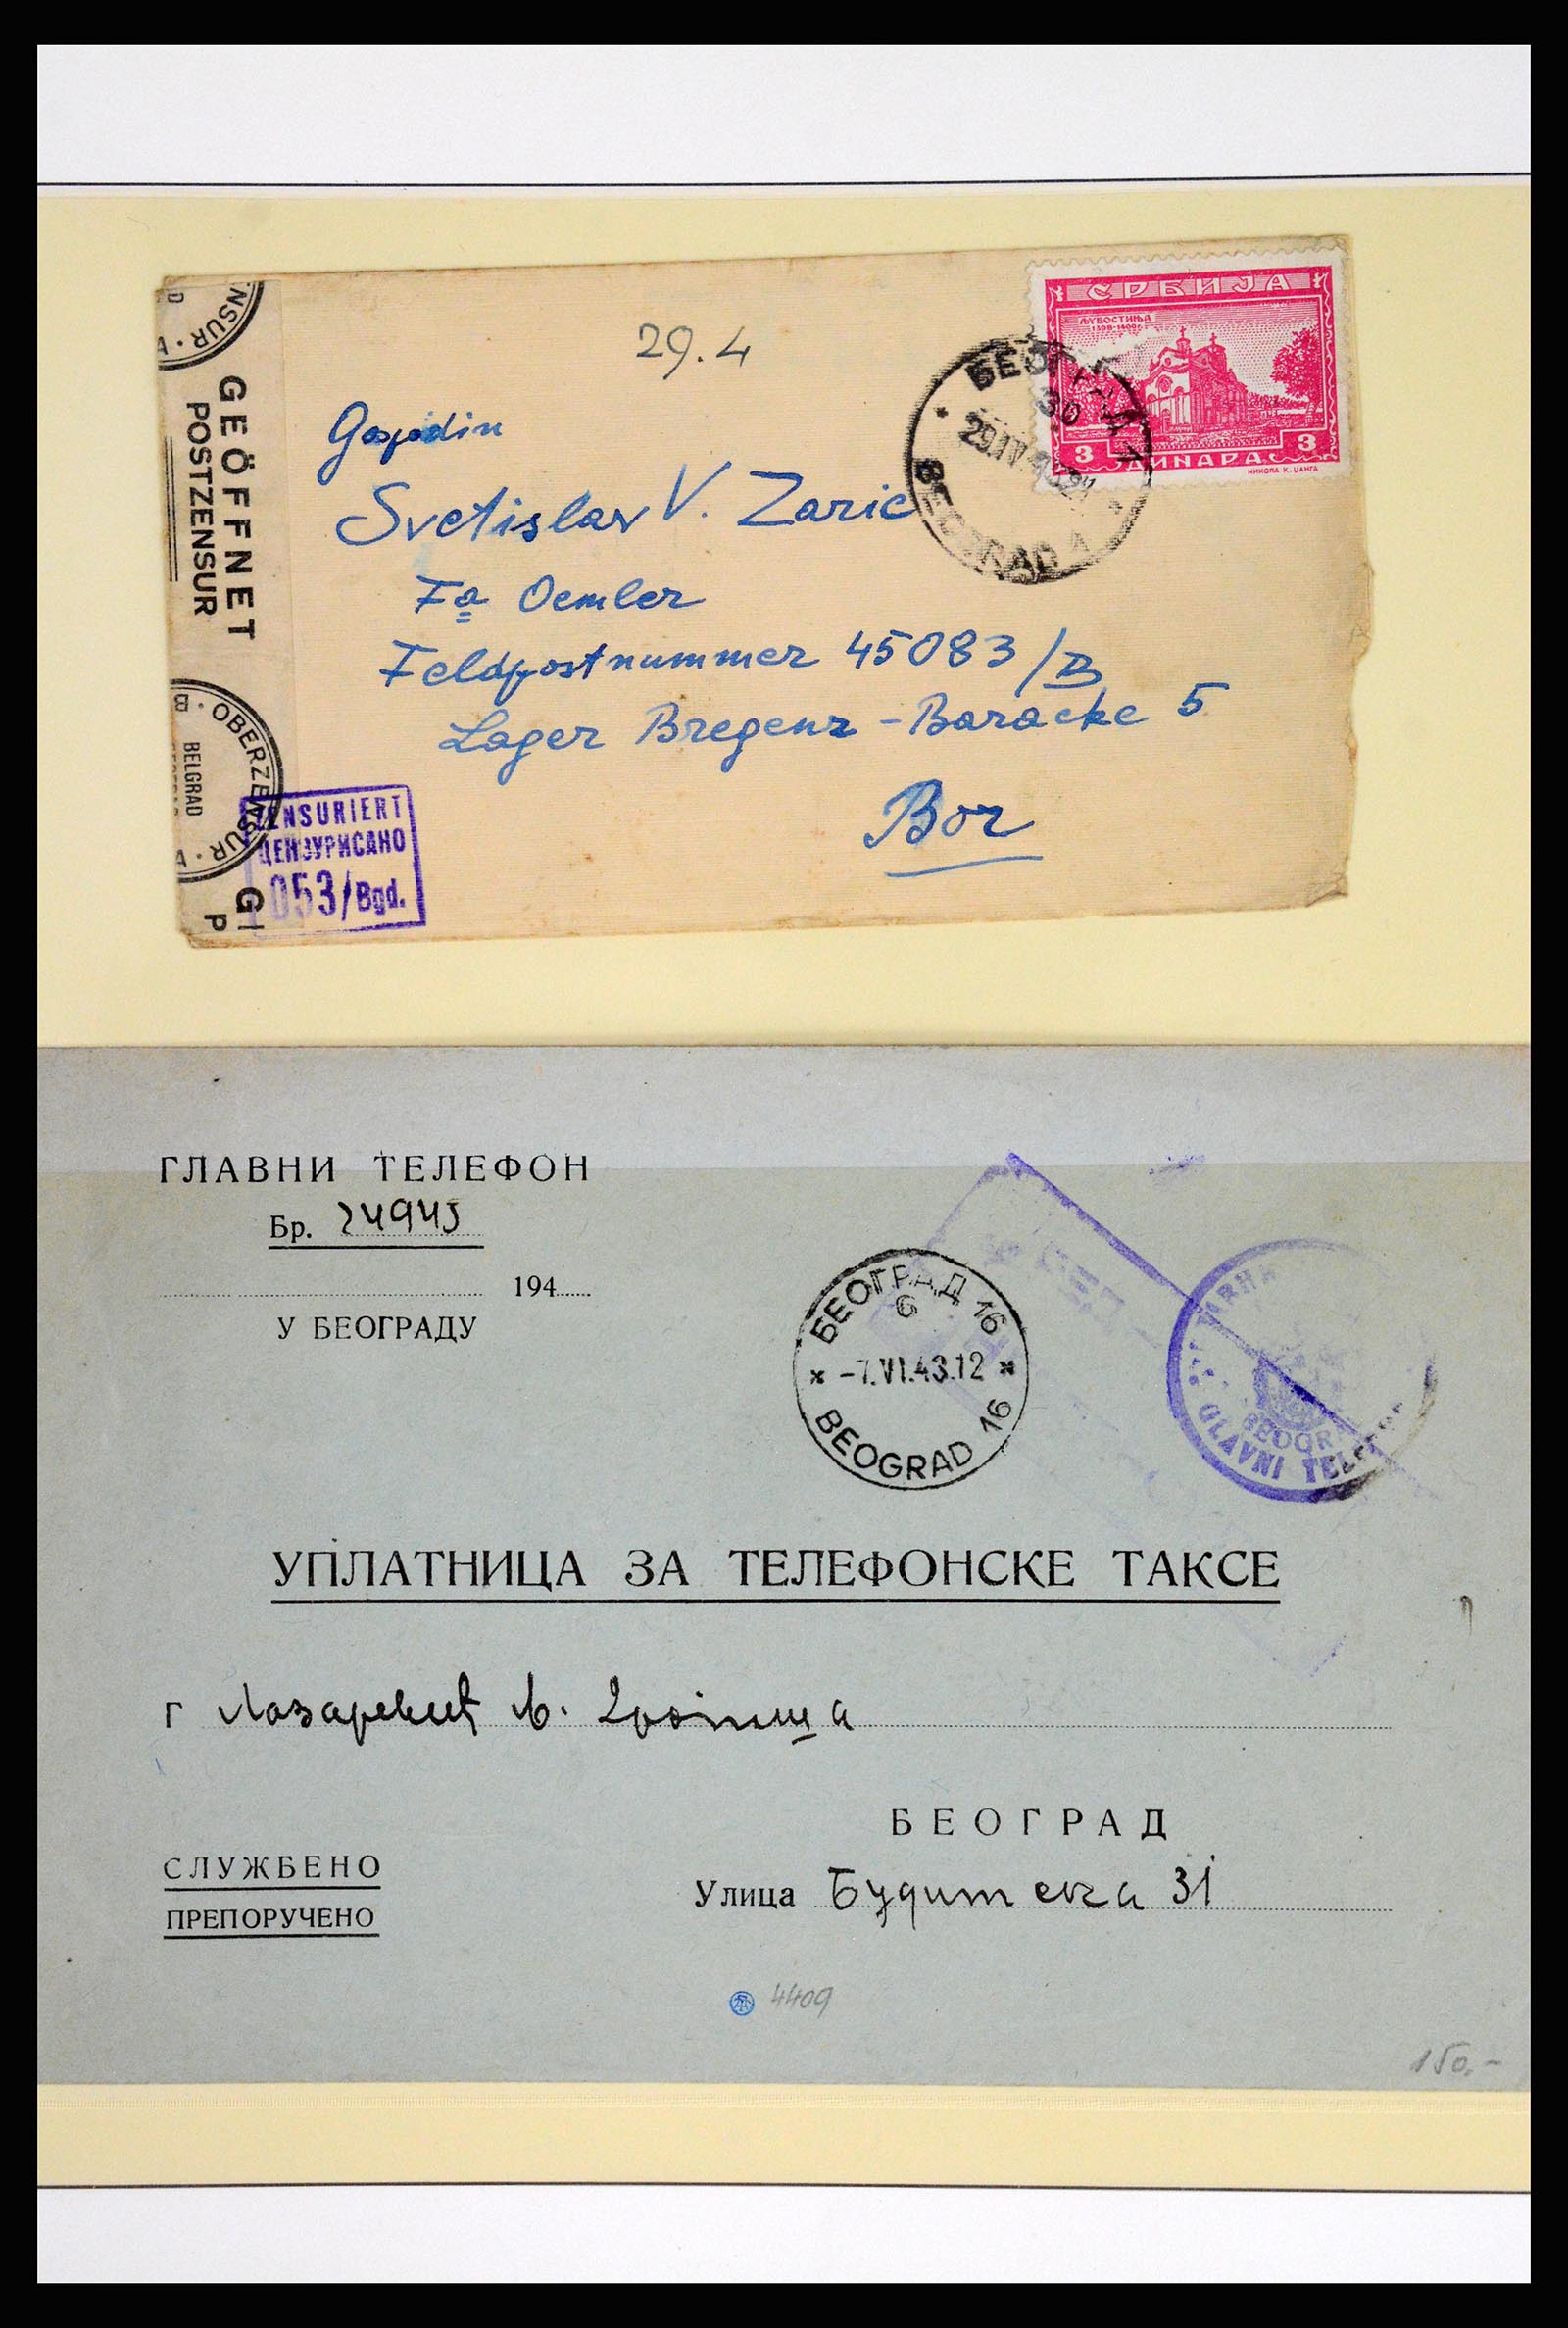 37066 053 - Stamp collection 37066 Serbia covers WW II.